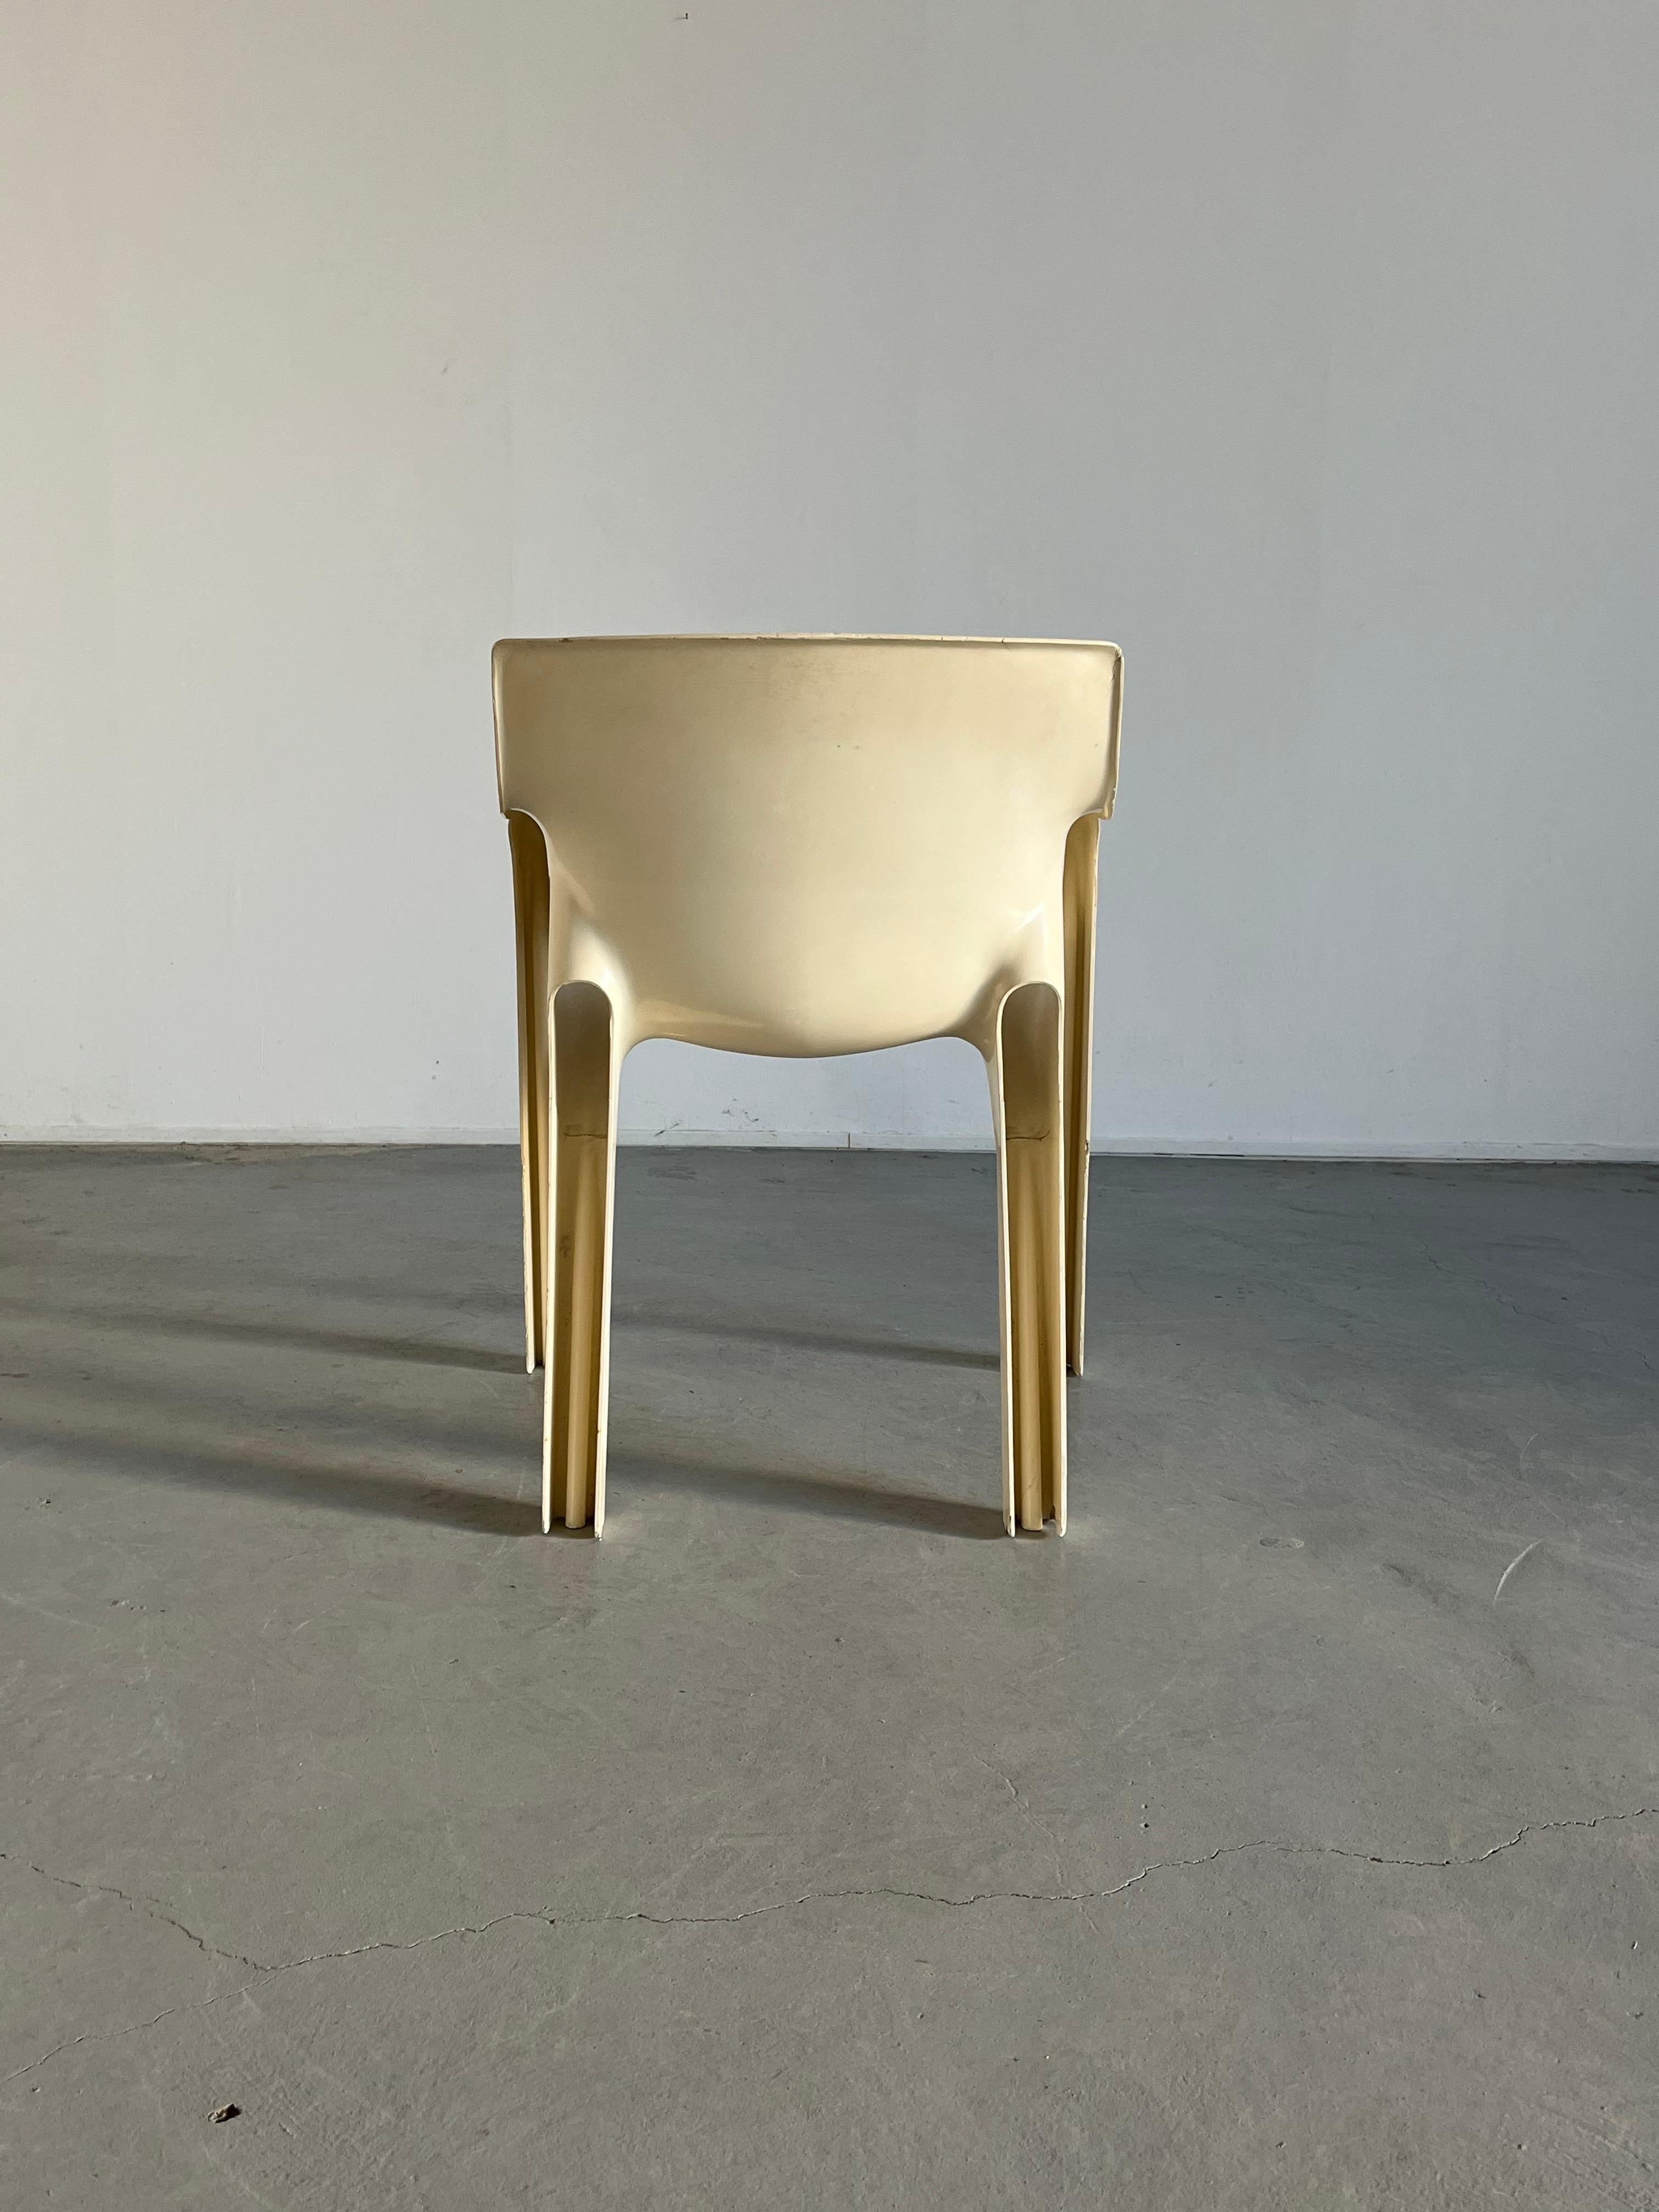 Late 20th Century White 'Gaudi' Chair by Vico Magistretti for Artemide, Vintage Early Model, 1970s For Sale